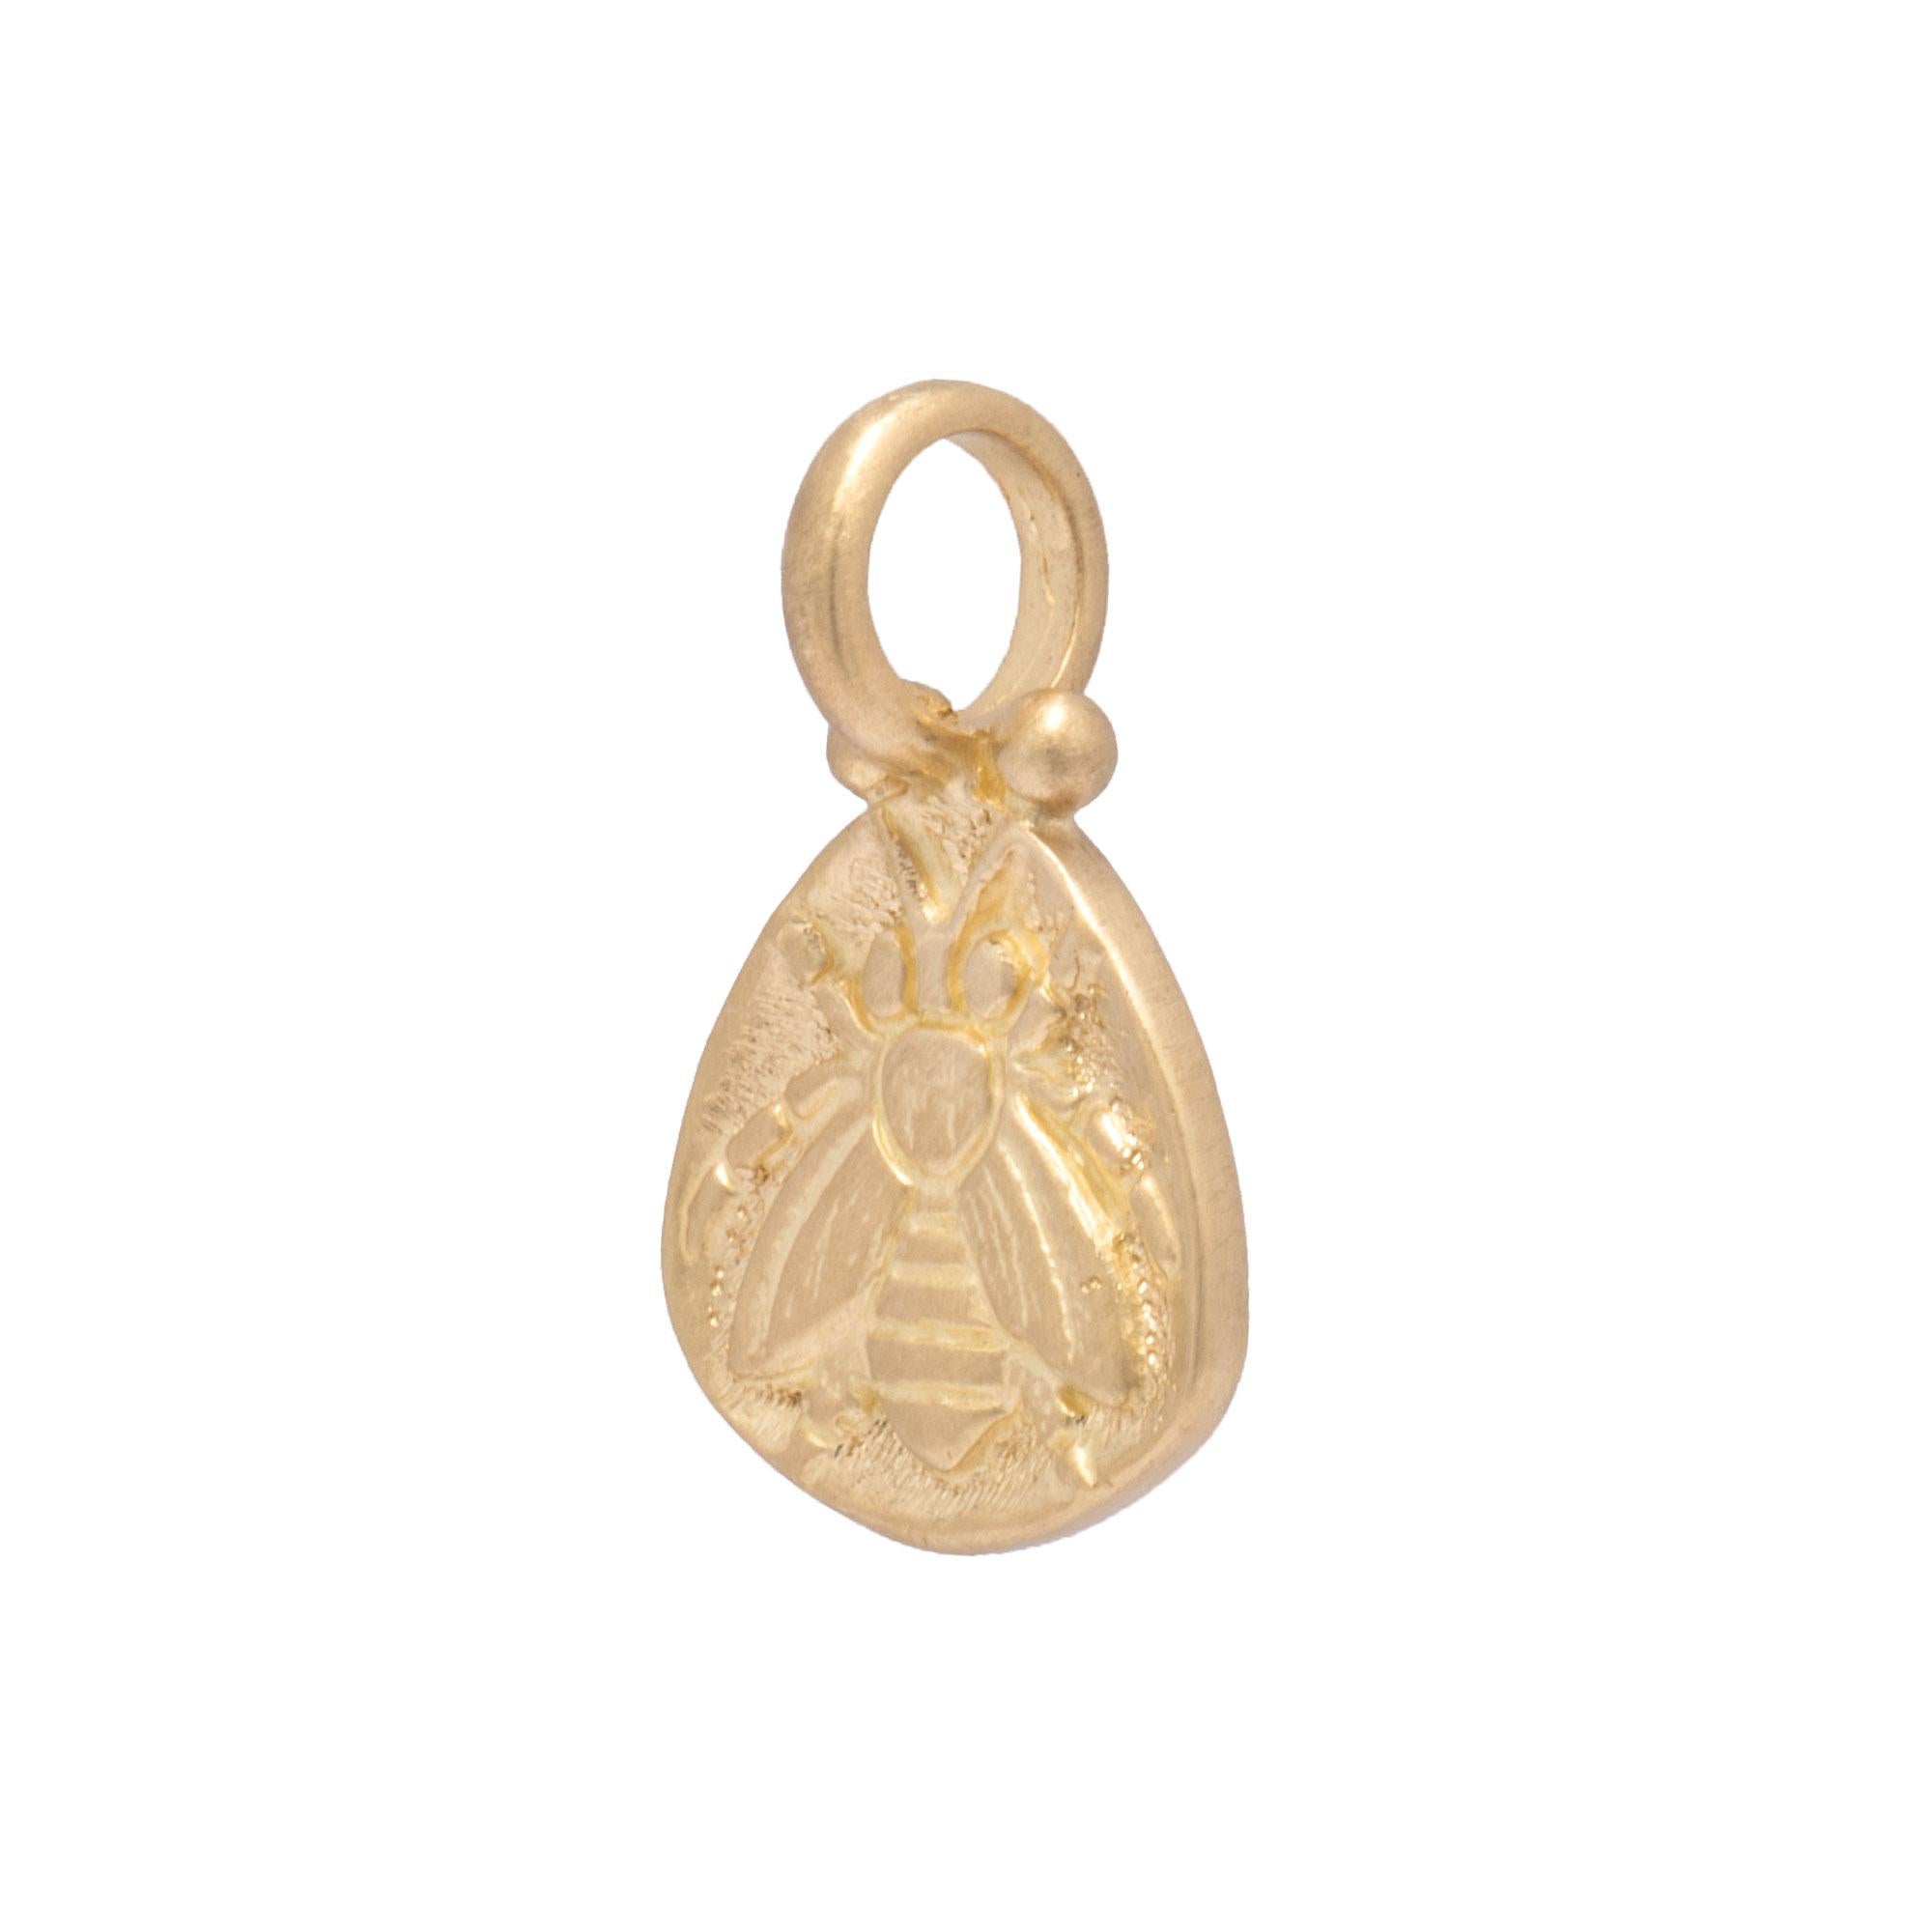 Our Honey Bee Amulet is a regal emblem of femininity in handcrafted 18k gold. Finely carved and finished in a rounded triangular pendant with 2 gold beads on either side of the rounded bail, this pendant can be worn alone or with additional chain or